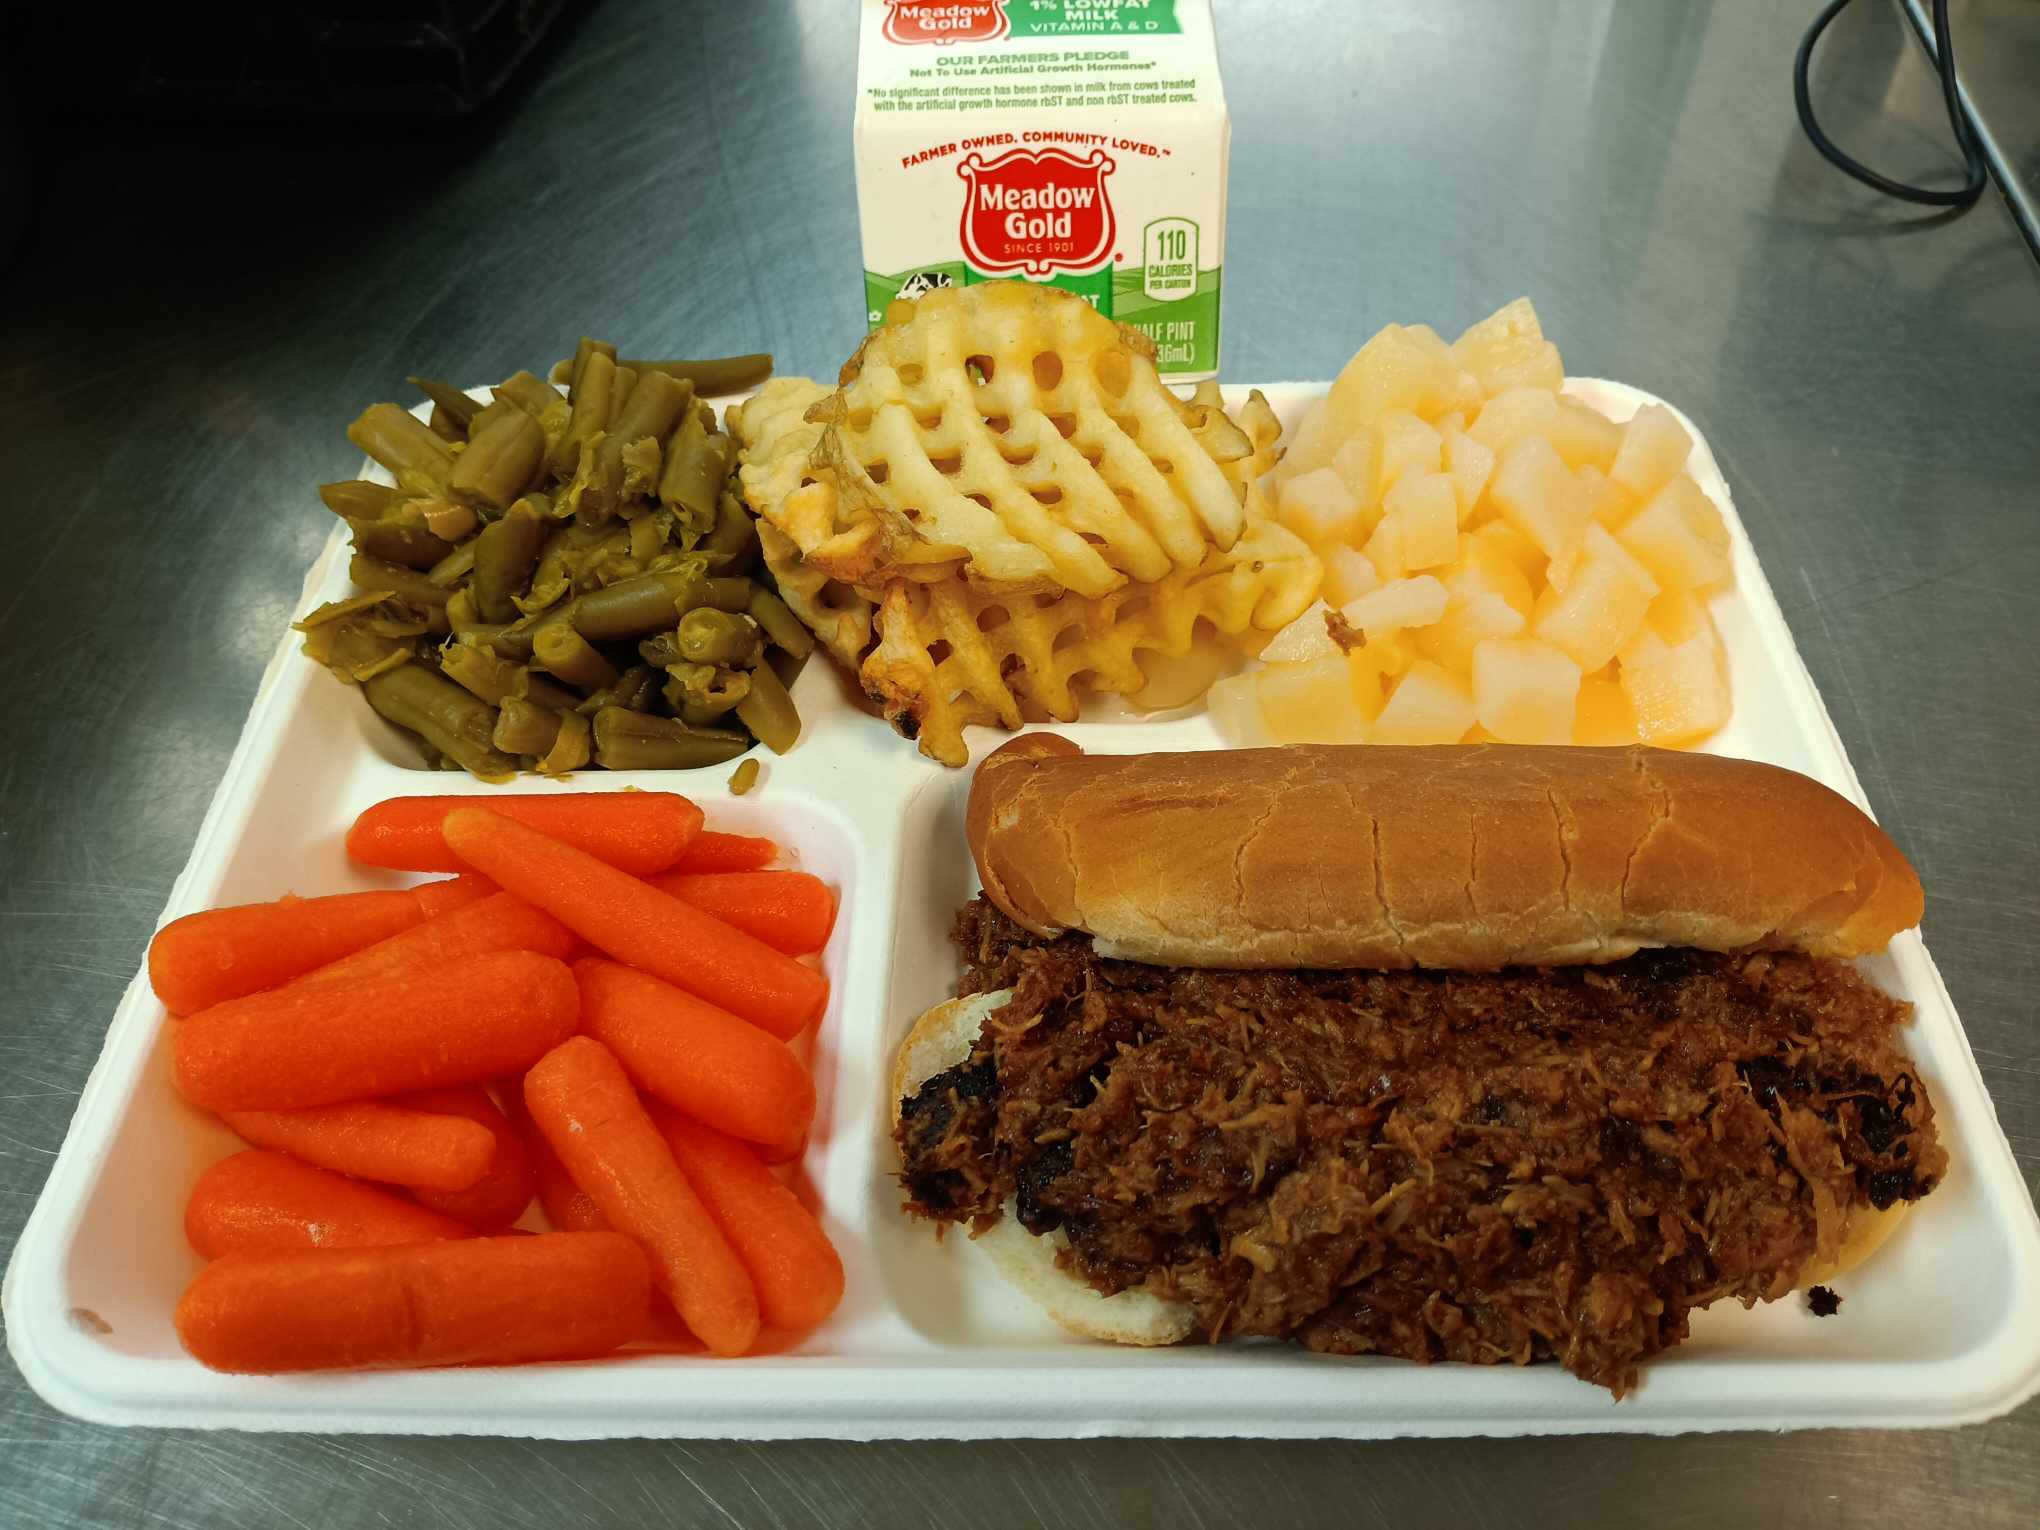 Pulled pork sandwich, waffle fries, green beans, pears, carrots, and milk